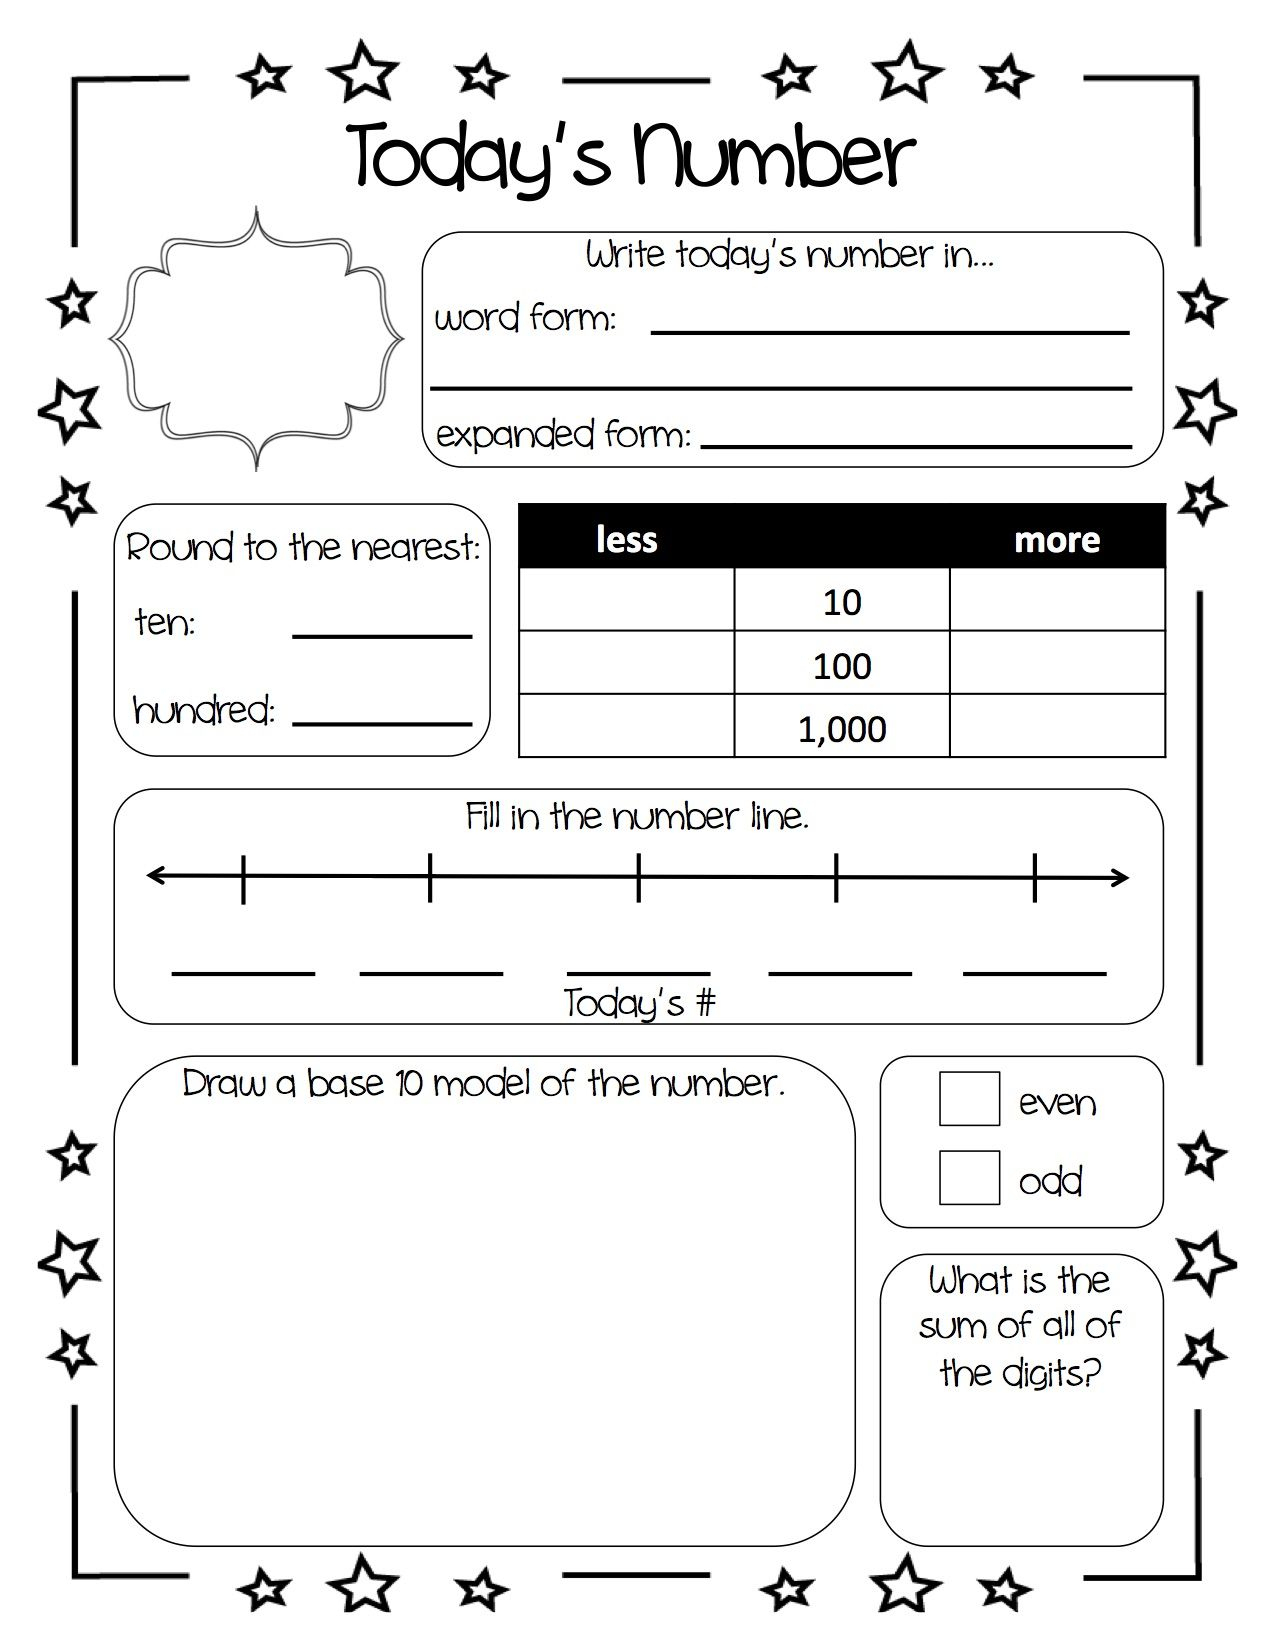 This Is A Number Of The Day Worksheet That My Colleague And I - Free Printable Number Of The Day Worksheets